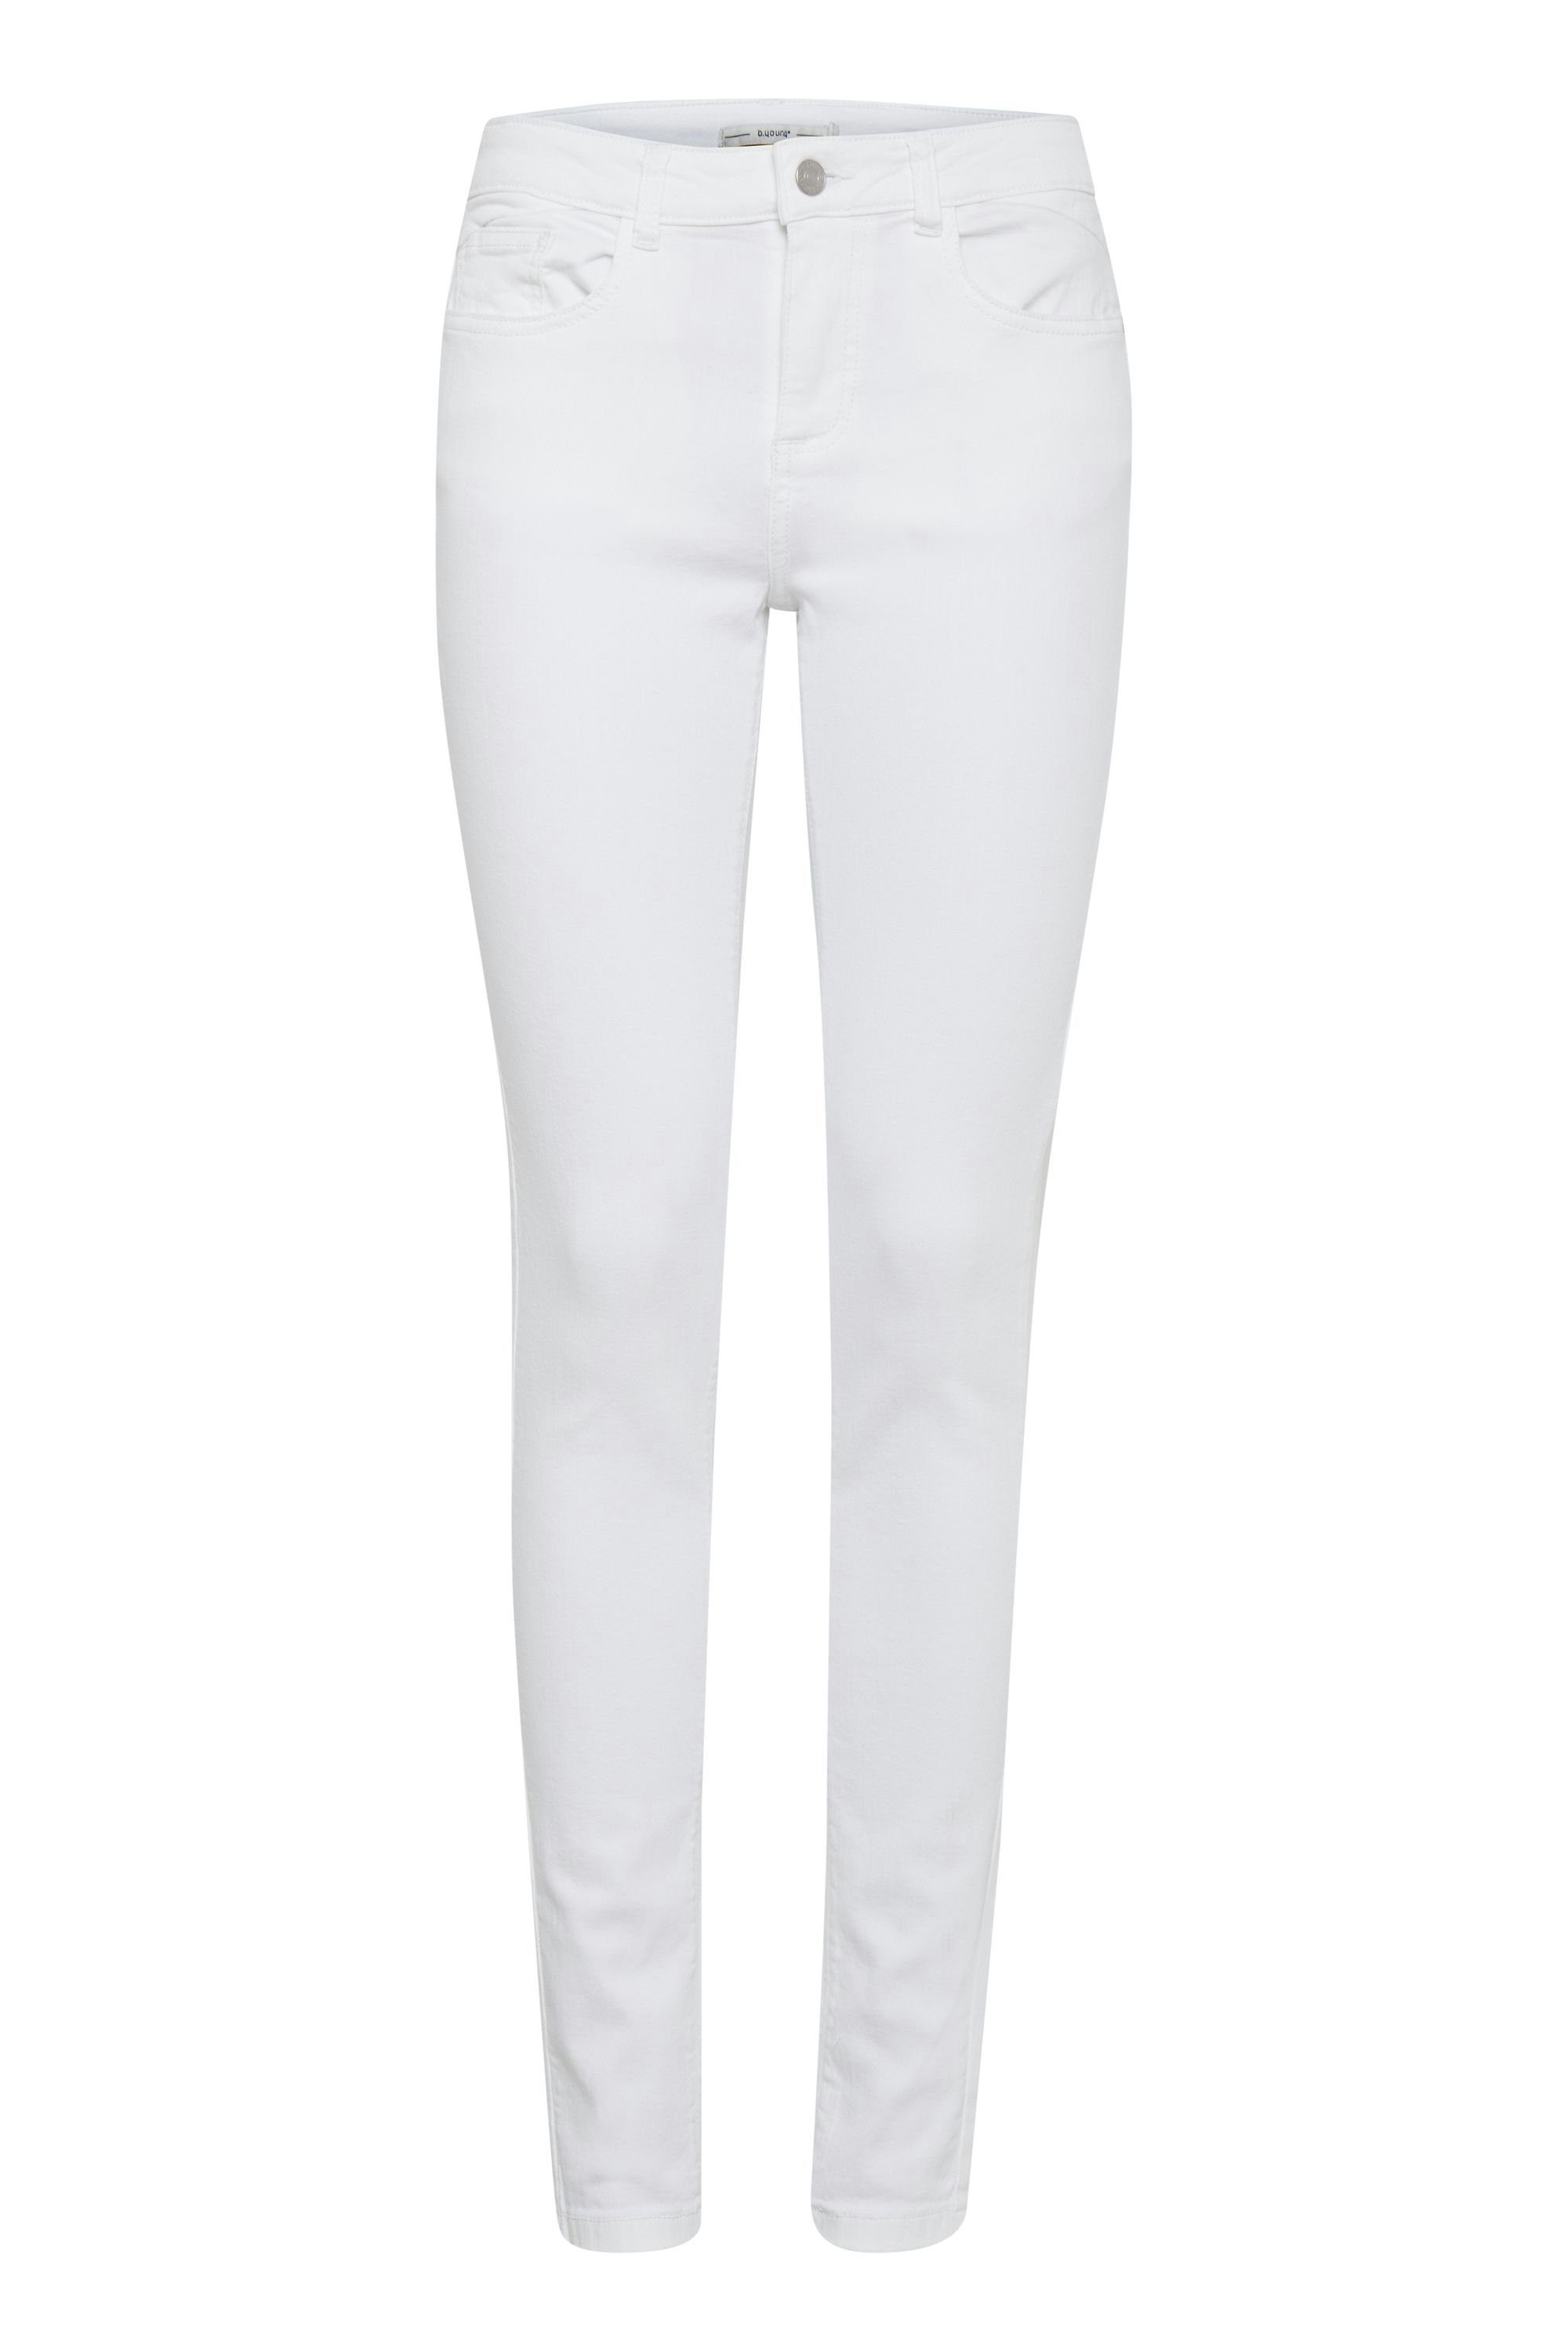 b.young Skinny-fit-Jeans BYLola Luni jeans - 20803214 Optical White (80100)